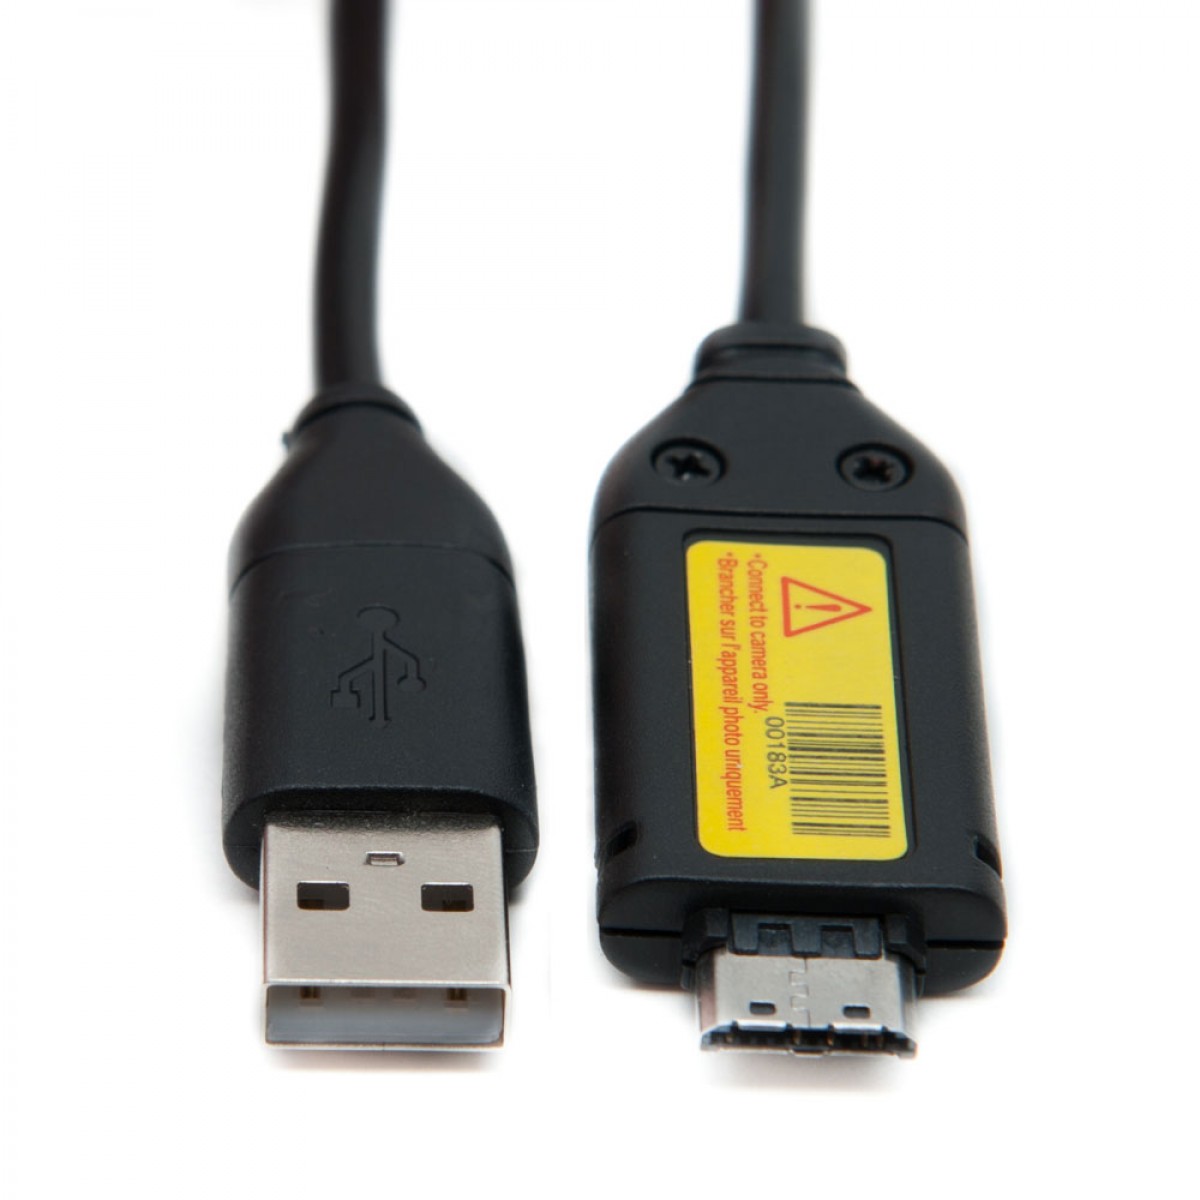 yan USB Data SYNC Cable Cord Lead for Samsung Camcorder AD39-00153 A/D AD39-00169 A 